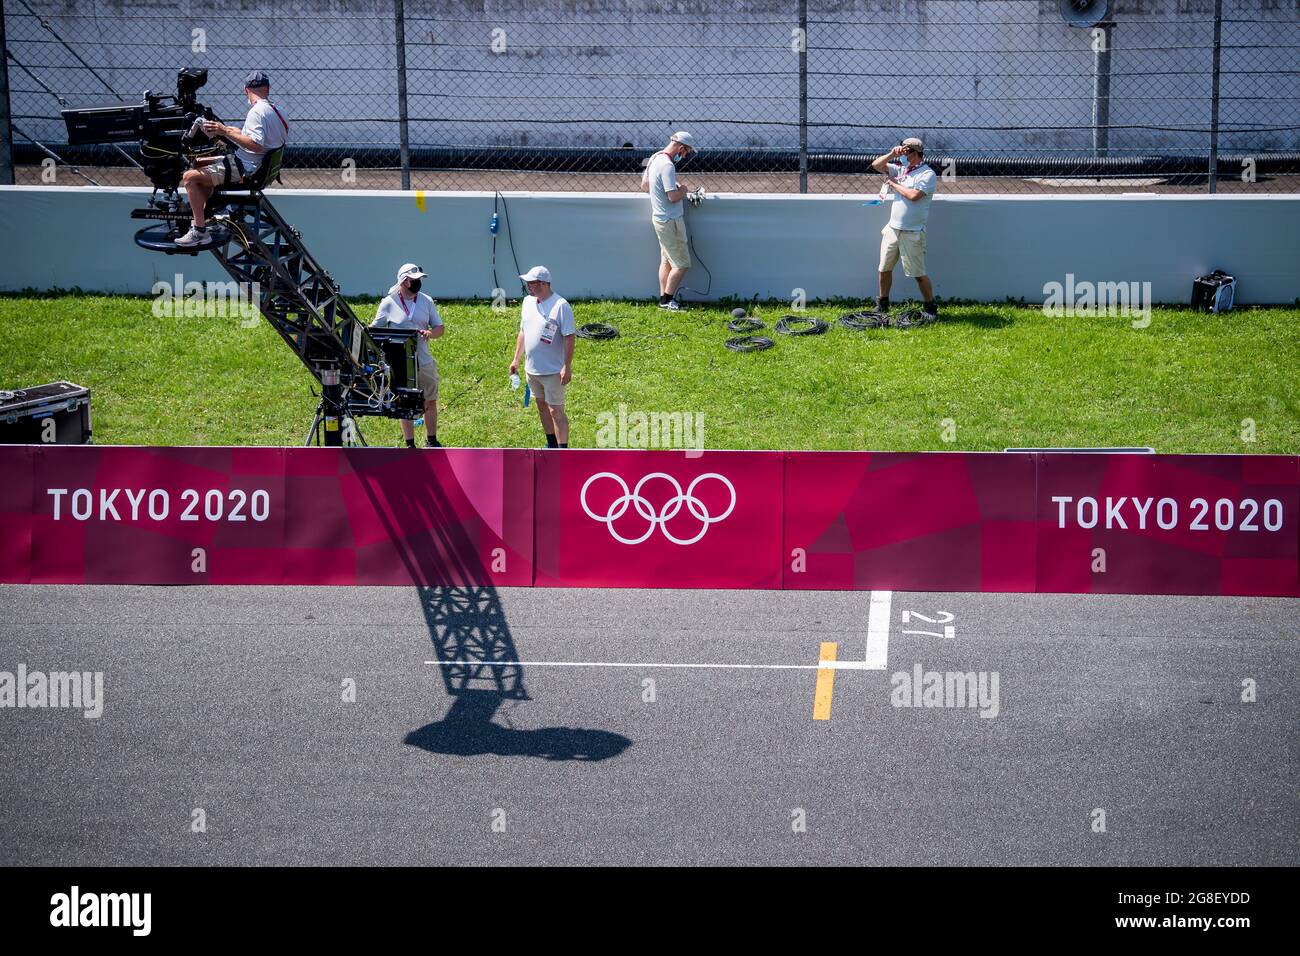 Illustration picture shows TV broadcasters during preparations at the Speedway cycling venue, ahead of the 'Tokyo 2020 Olympic Games' in Tokyo, Japan Stock Photo